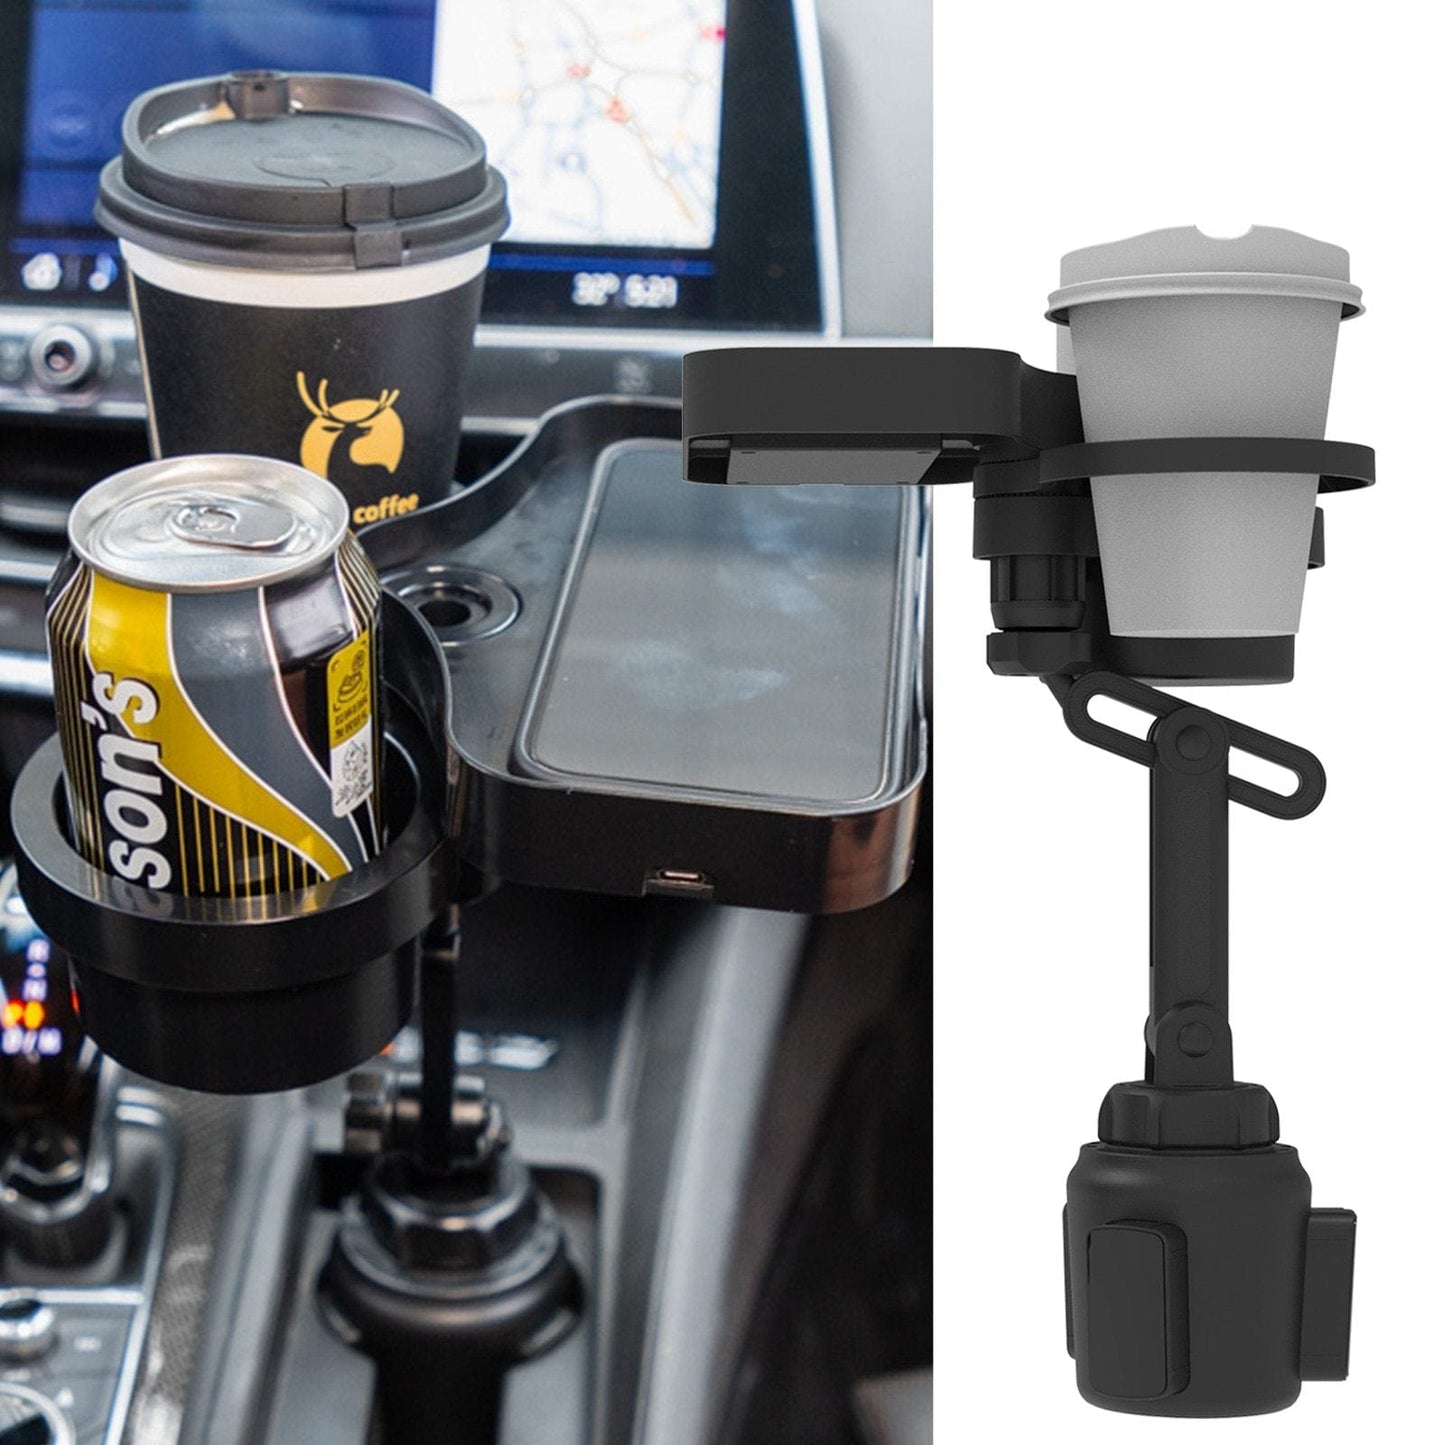 MultiCup - Multipurpose Cup Holder With Wireless Charger